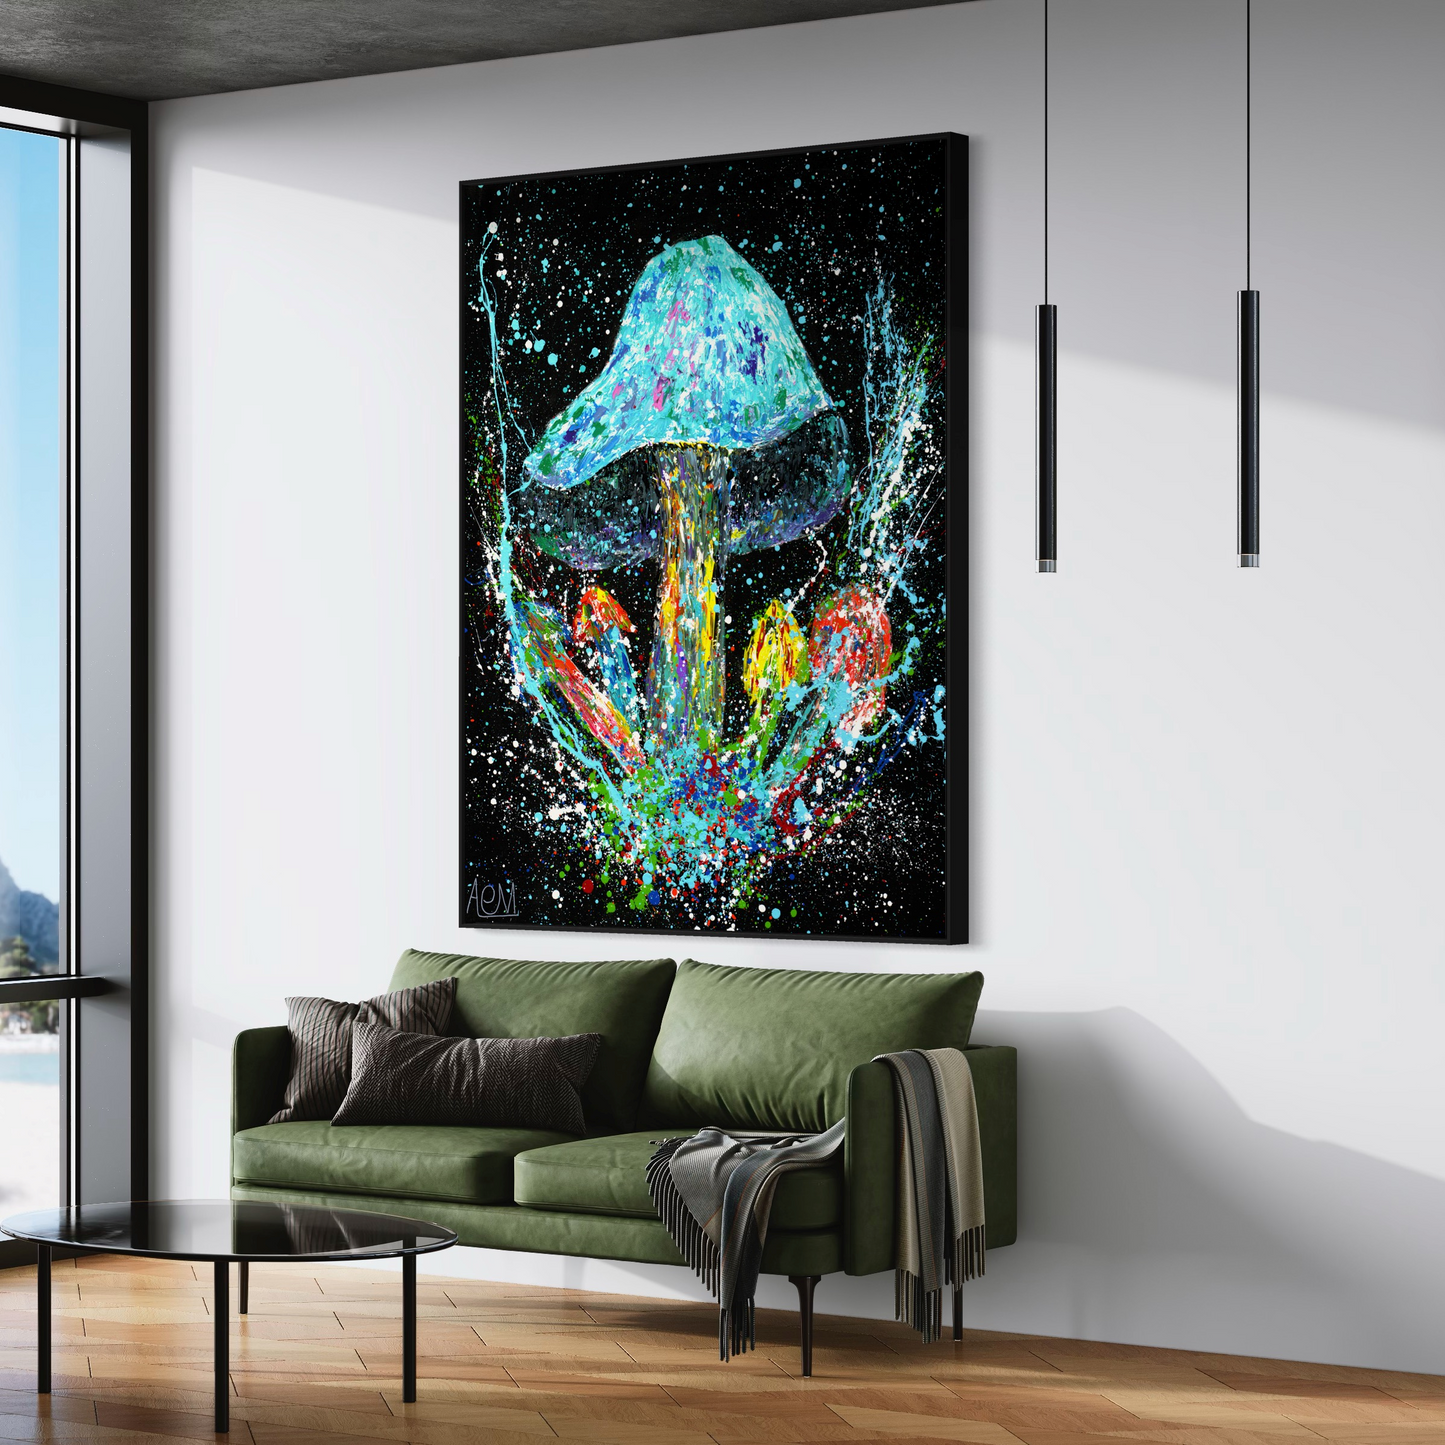 Contemporary living space with a captivating wall painting of a psychedelic mushroom in a splash of iridescent colors on a black background, above an olive green velvet sofa with coordinating throw pillows and blanket, flanked by modern hanging lights.